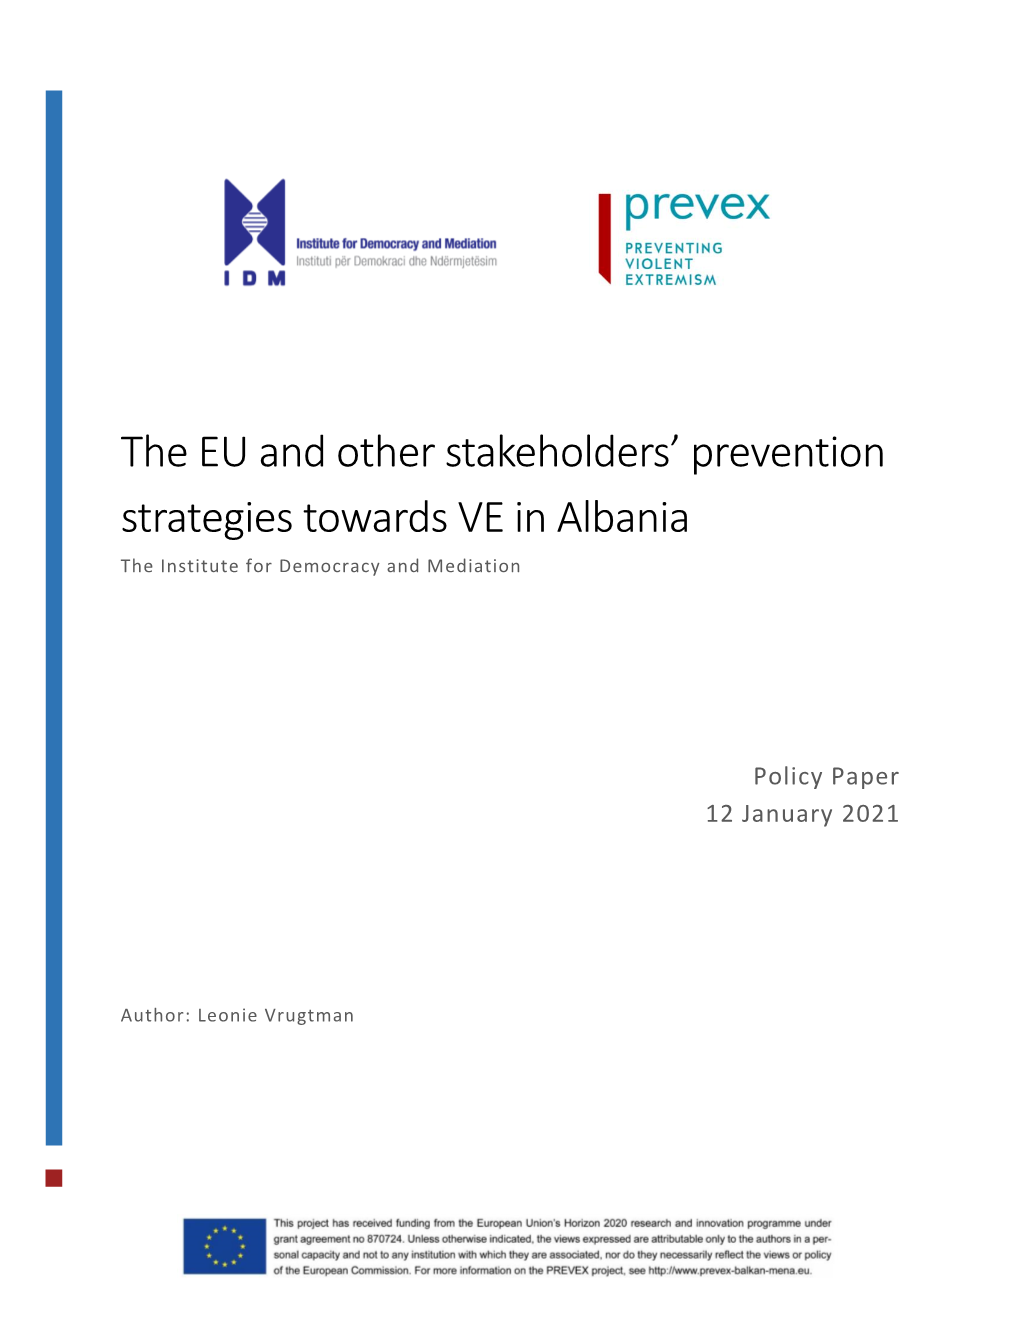 PREVEX Policy Paper on PCVE in Albania